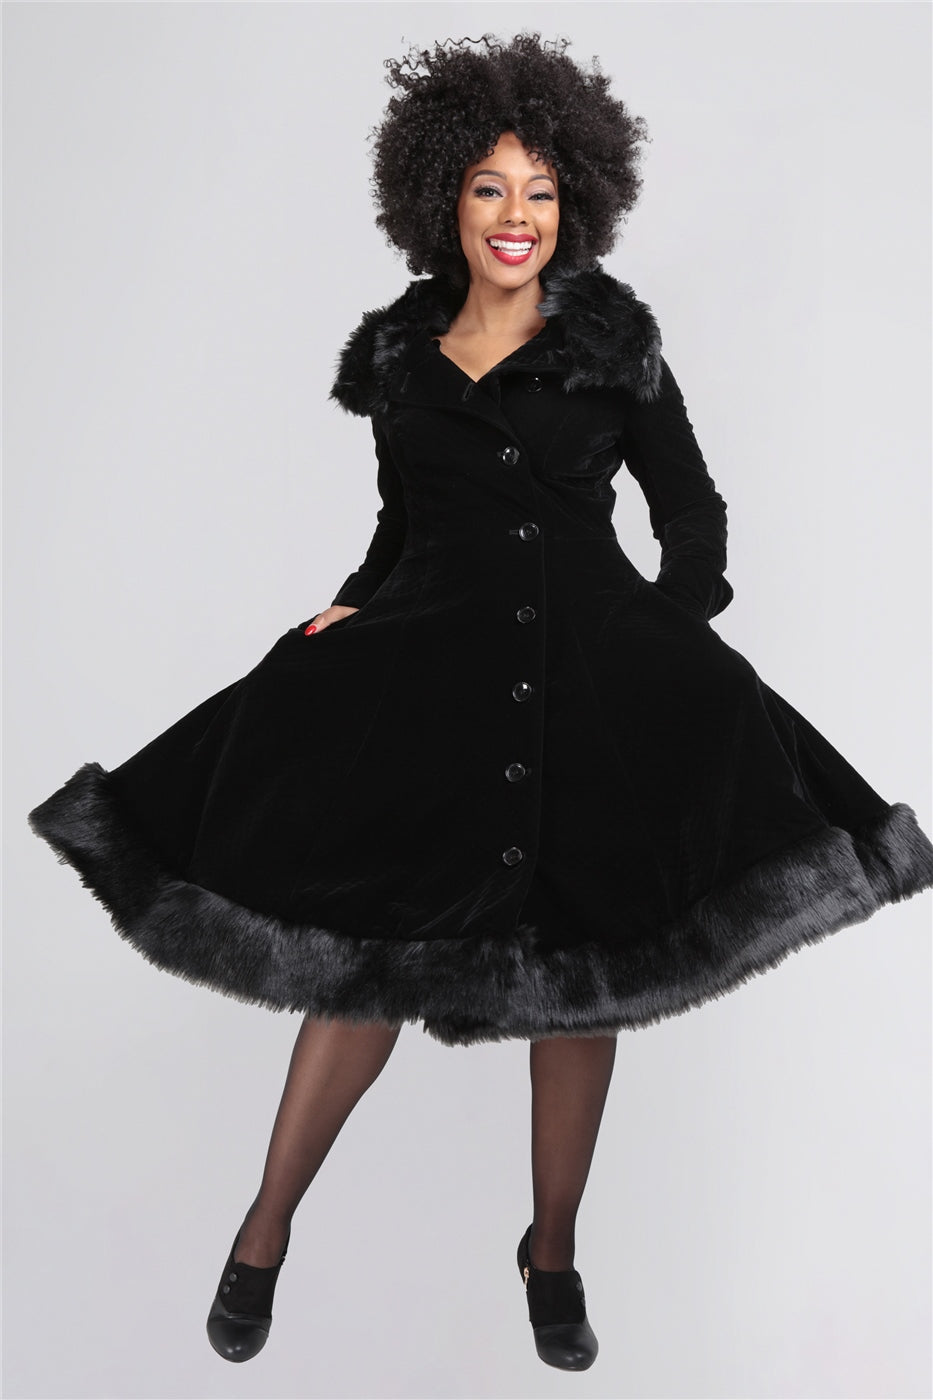 Nuit Quilted Velvet Swing Coat by Collectif